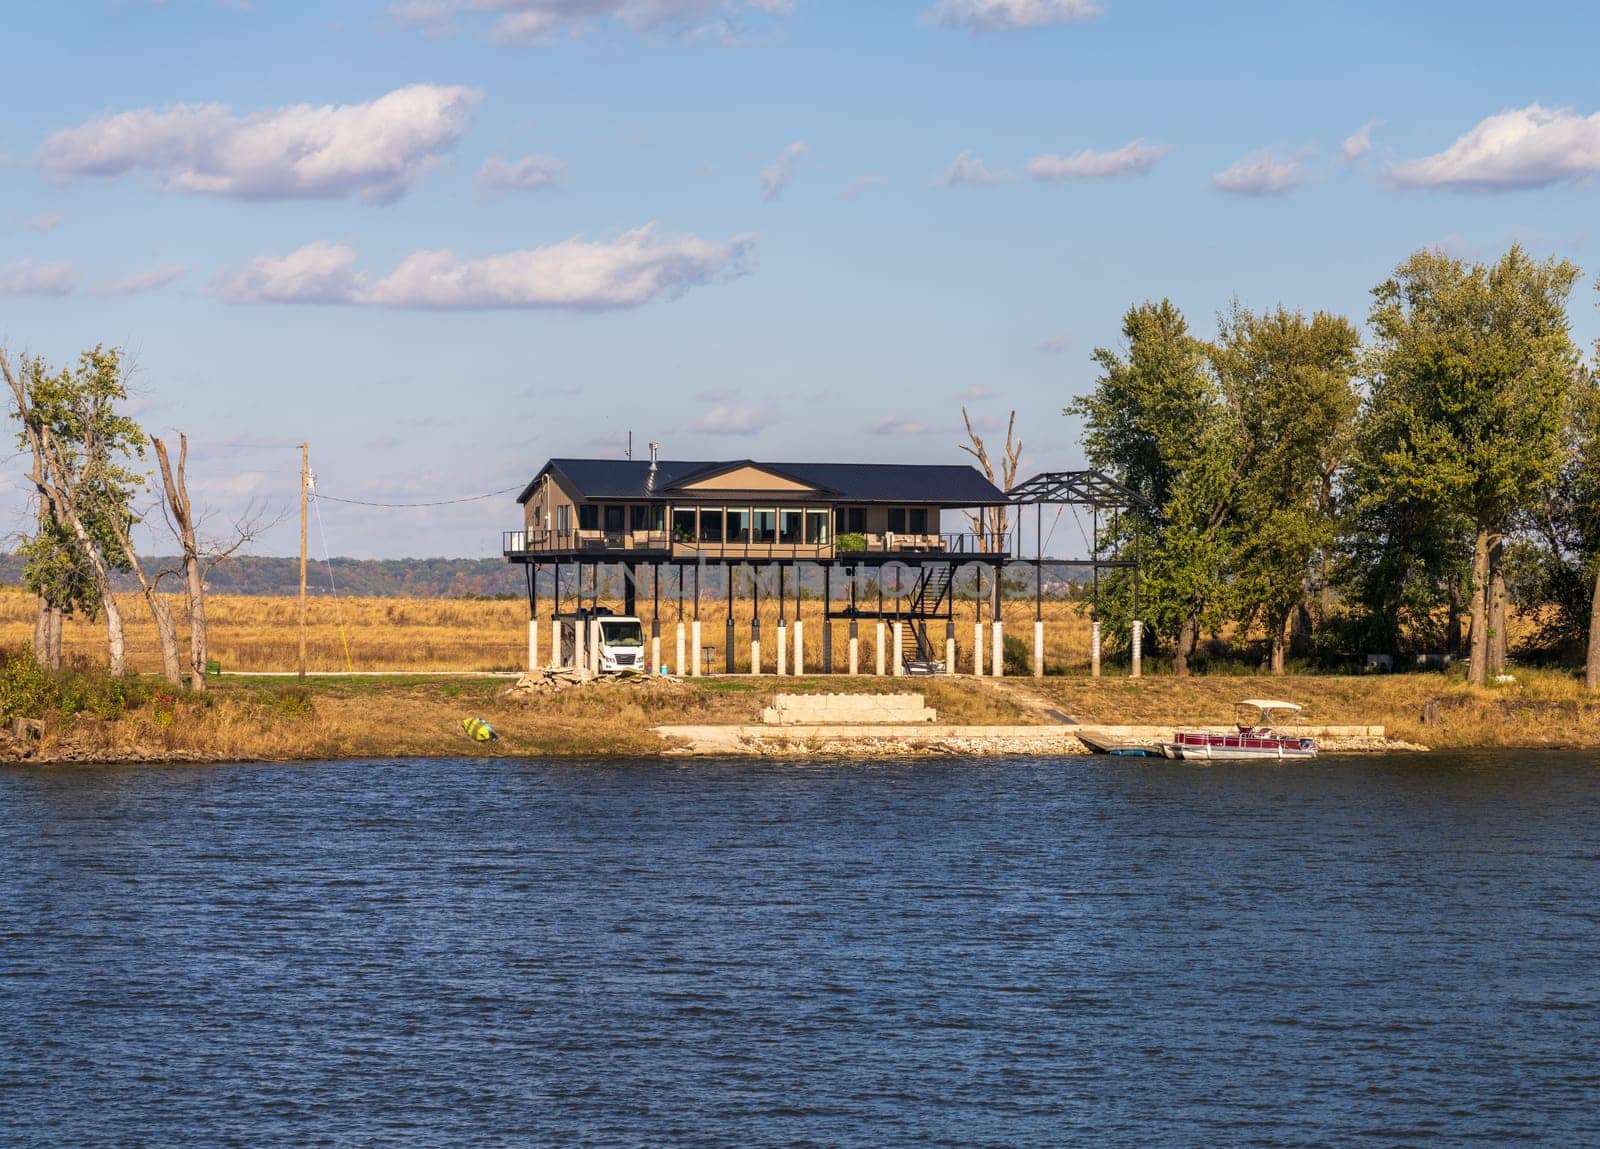 Modern home on high concrete and steel stilts to avoid Mississippi river floods by steheap